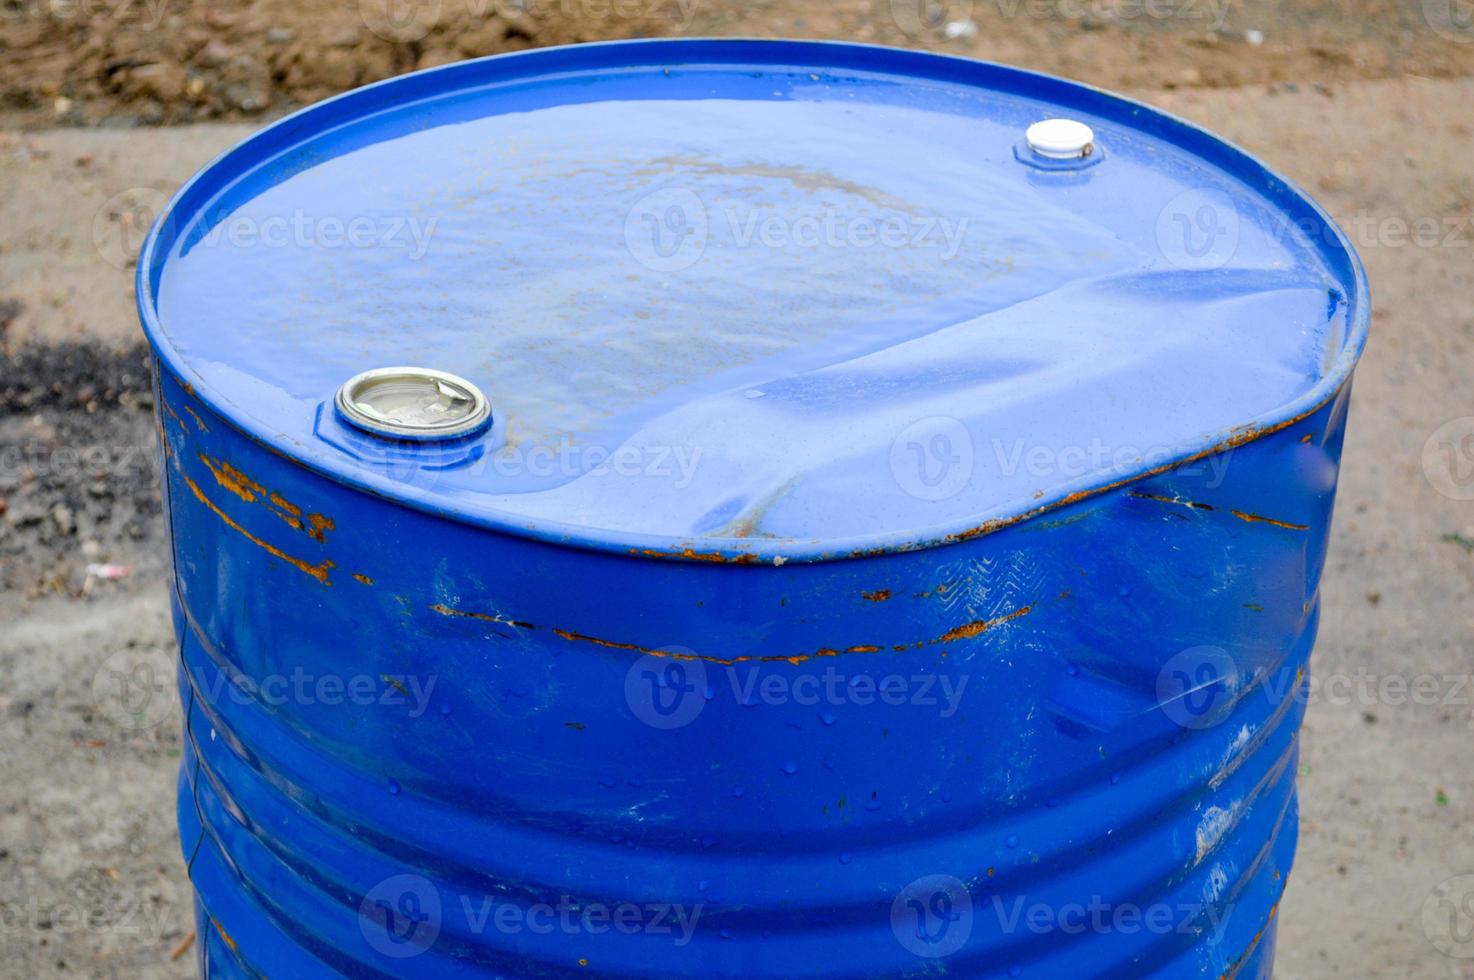 Large metal iron industrial blue round 200 liter barrel for storing gasoline and diesel fuel, liquid photo